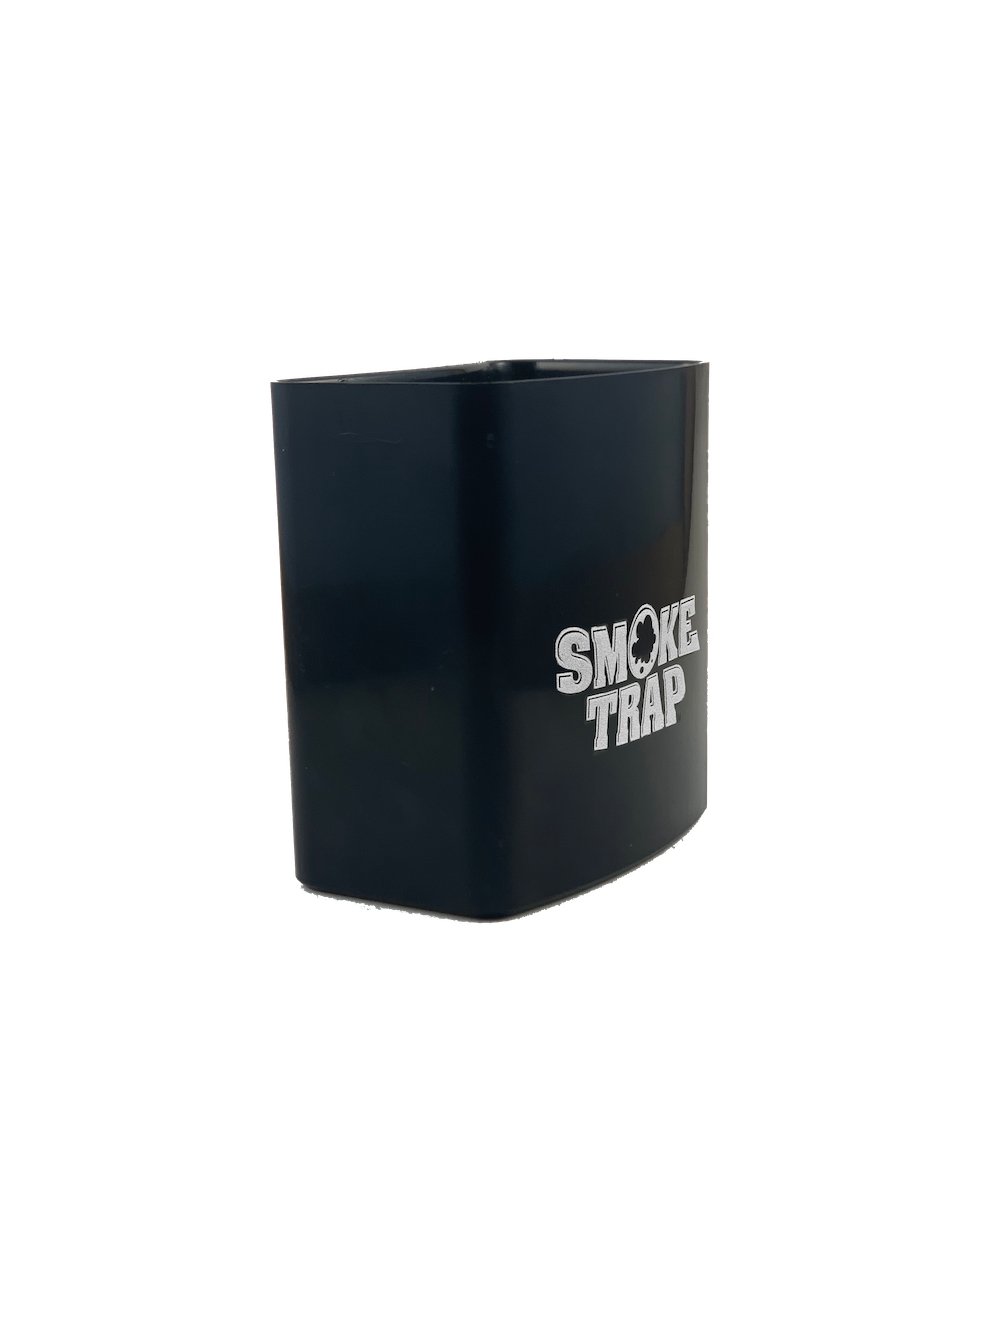 REPLACEMENT FILTER CARTRIDGES FOR SMOKE TRAP 2.0